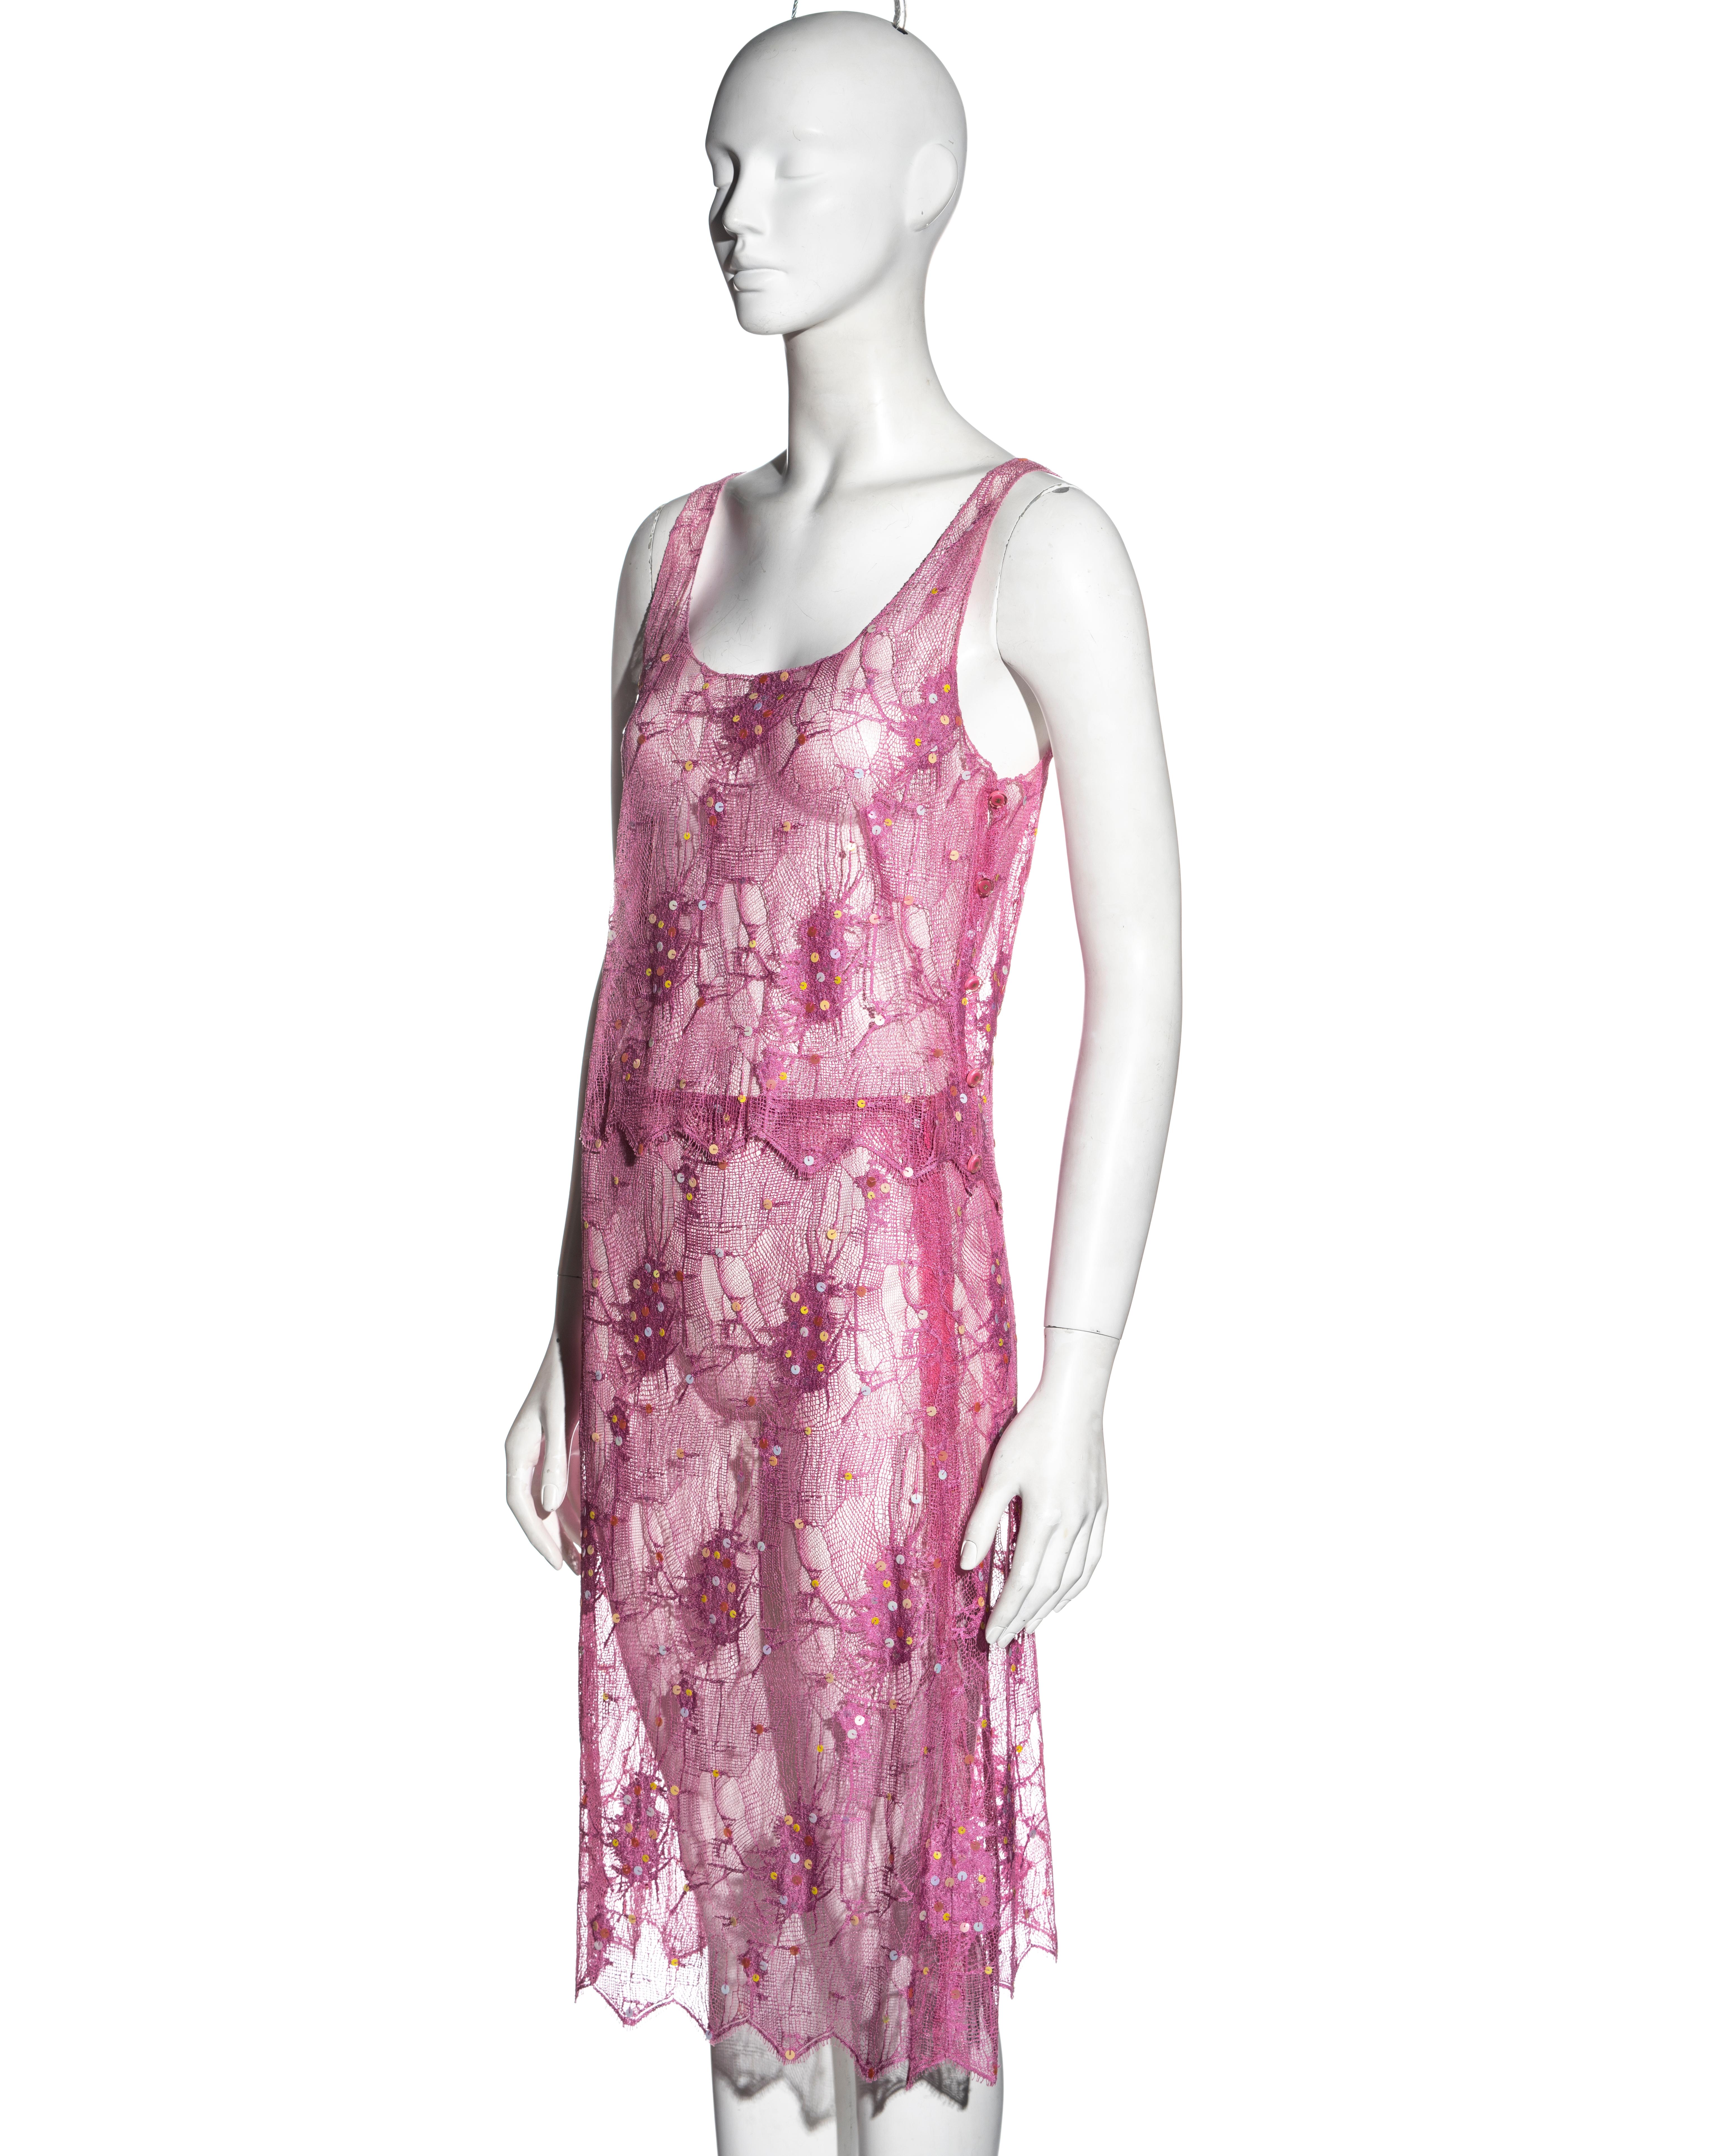 Women's Chanel by Karl Lagerfeld pink sequin lace top and skirt, ss 2000